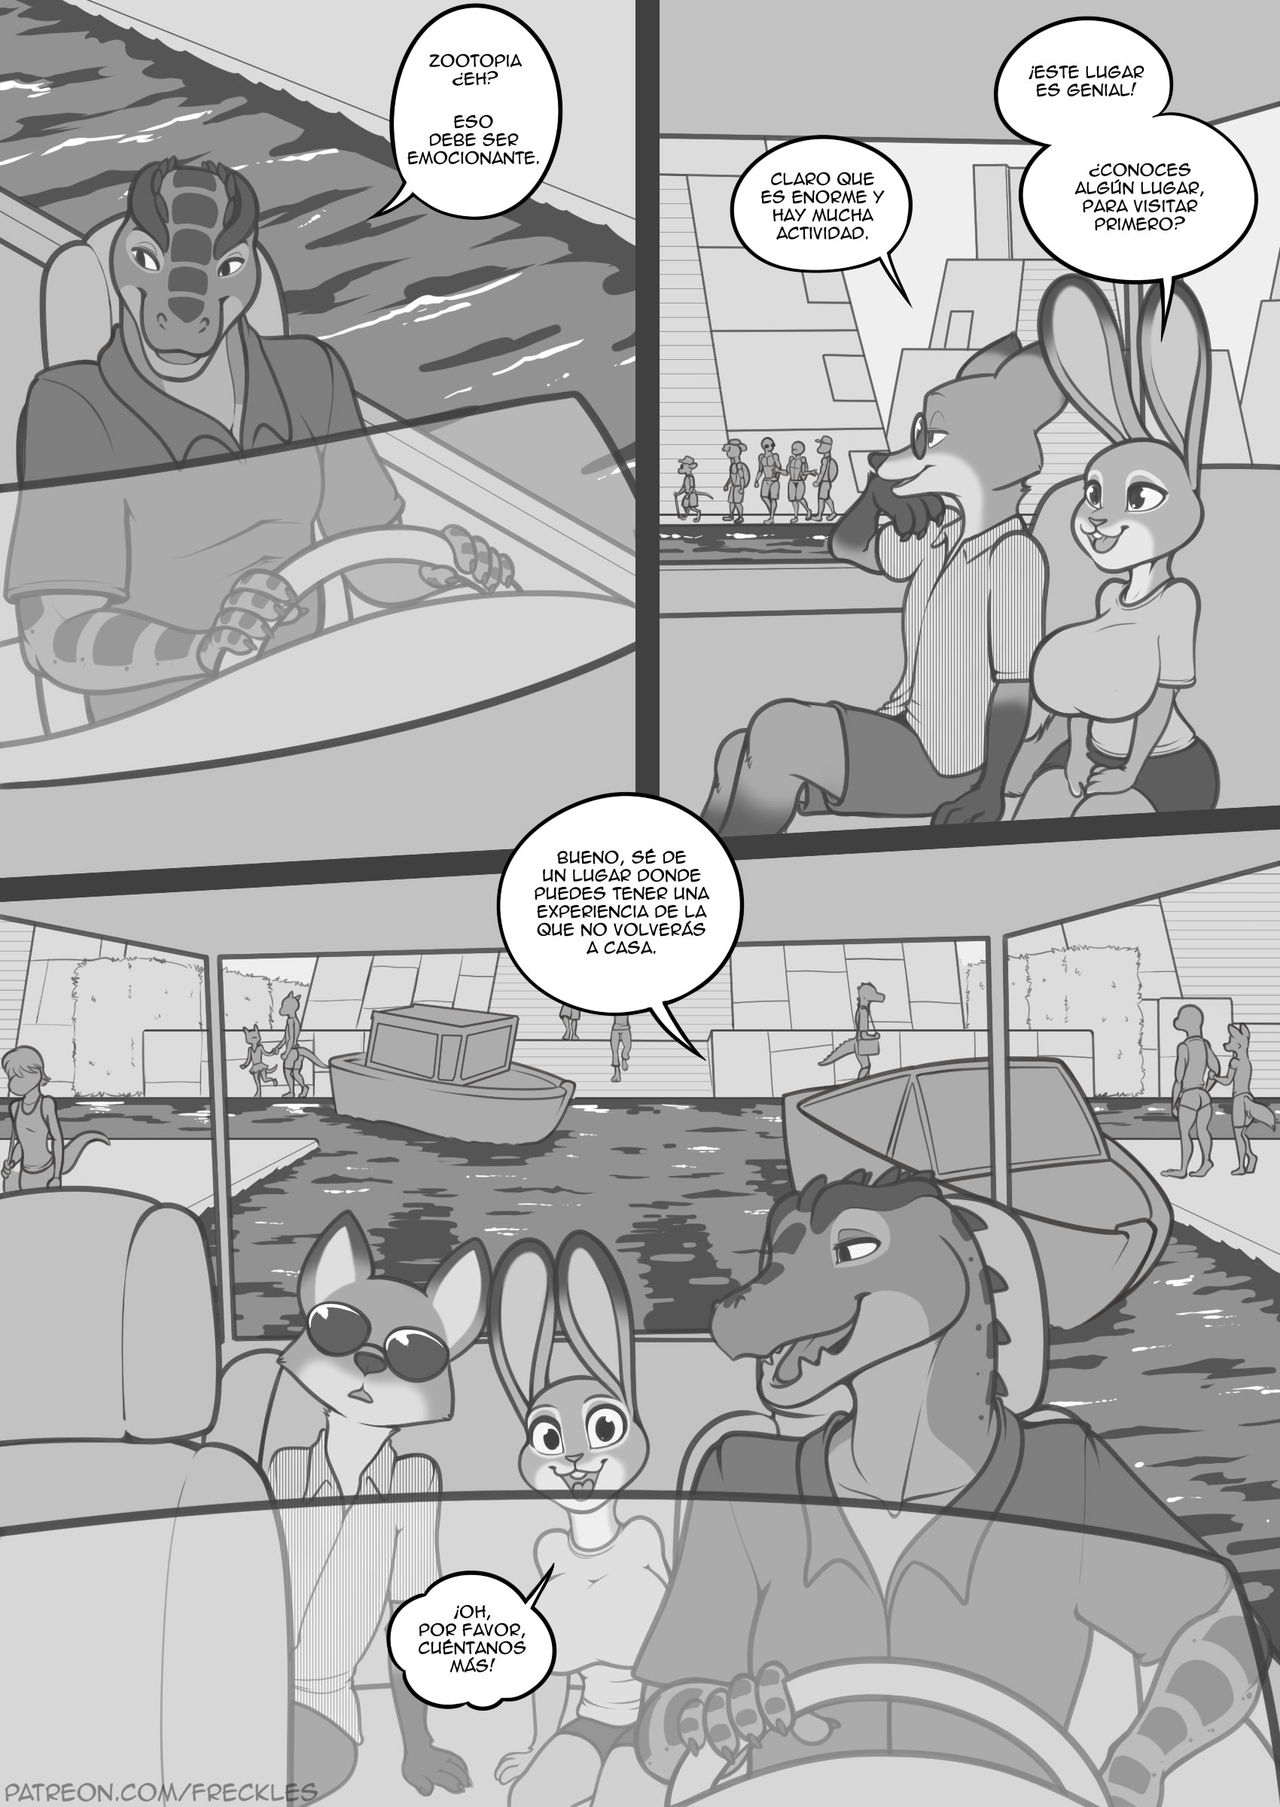 [Freckles] Busted 3 / Reventar 3 (Zootopia) [Red Fox Makkan] 2